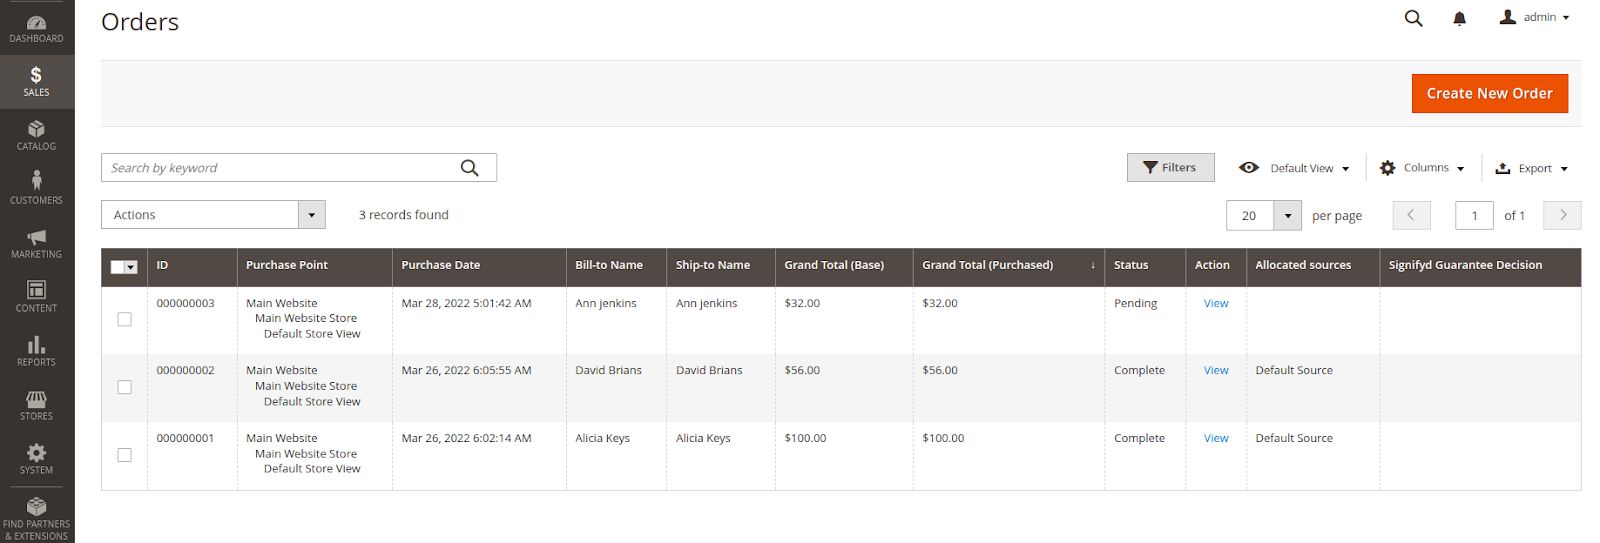 The orders interface in the Magento 2 admin panel